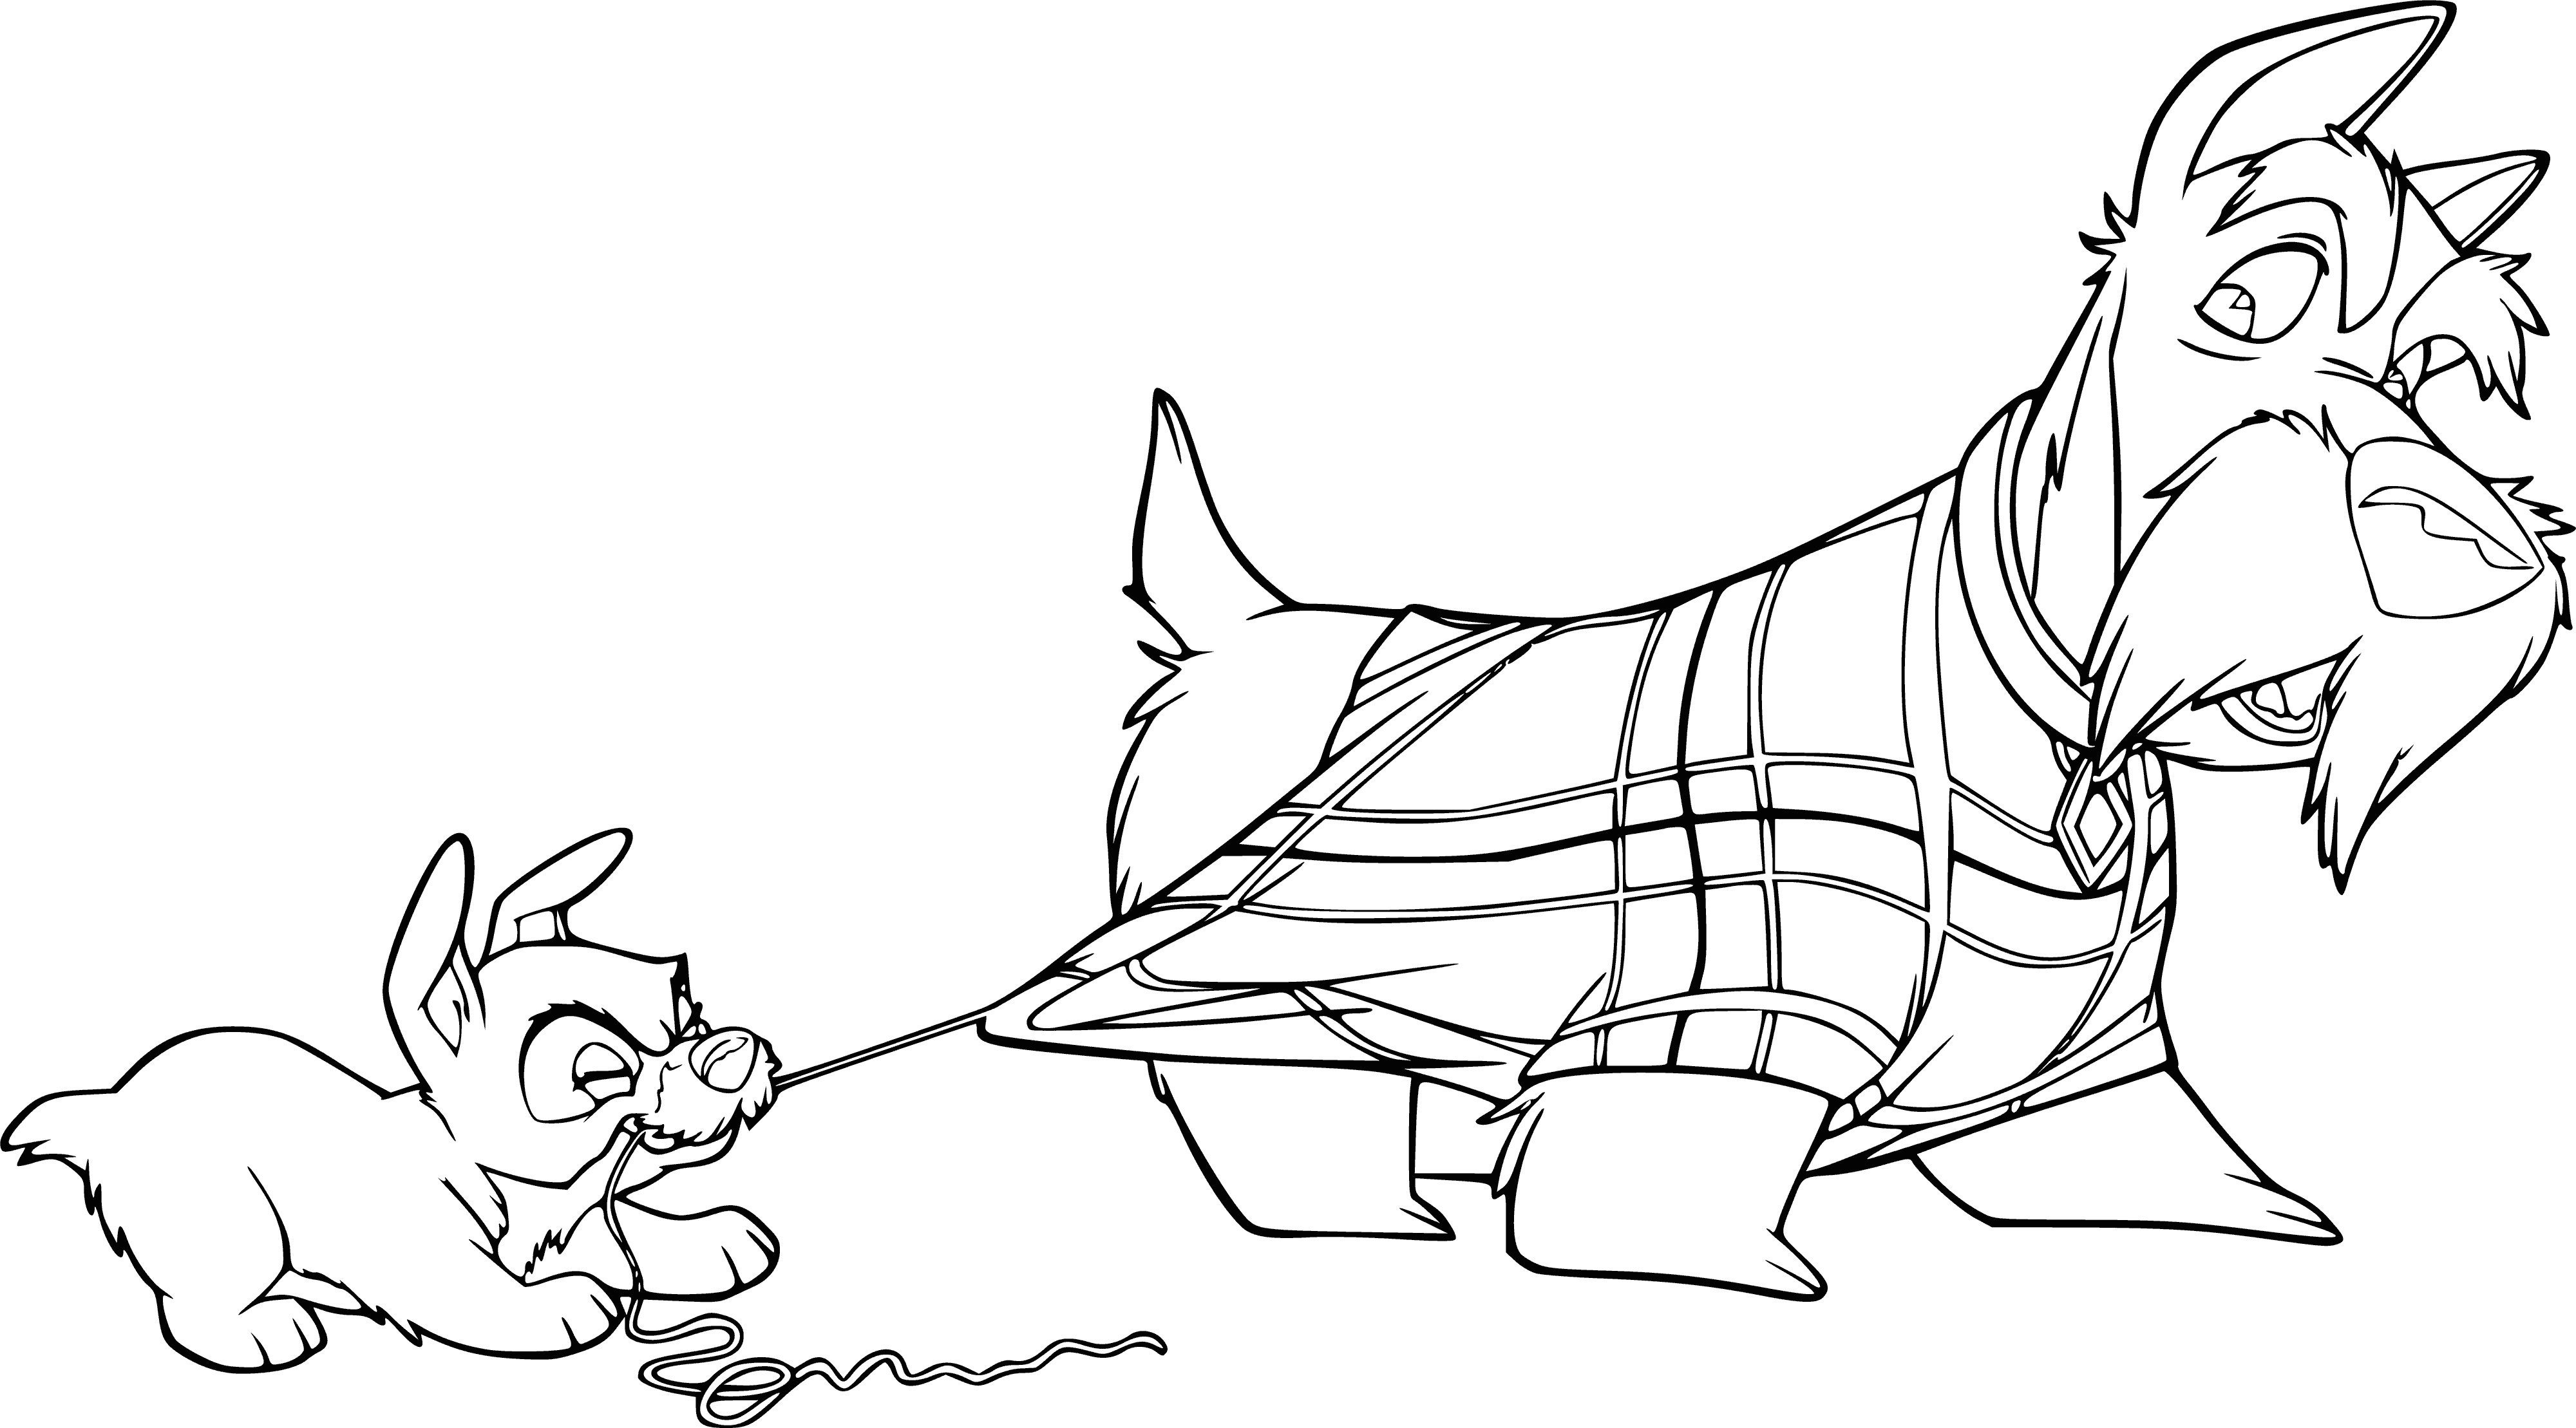 coloring page: The Lady and the Tramp, with Puppy in tow, sit happily together sharing a moment of joyous companionship. #Disney